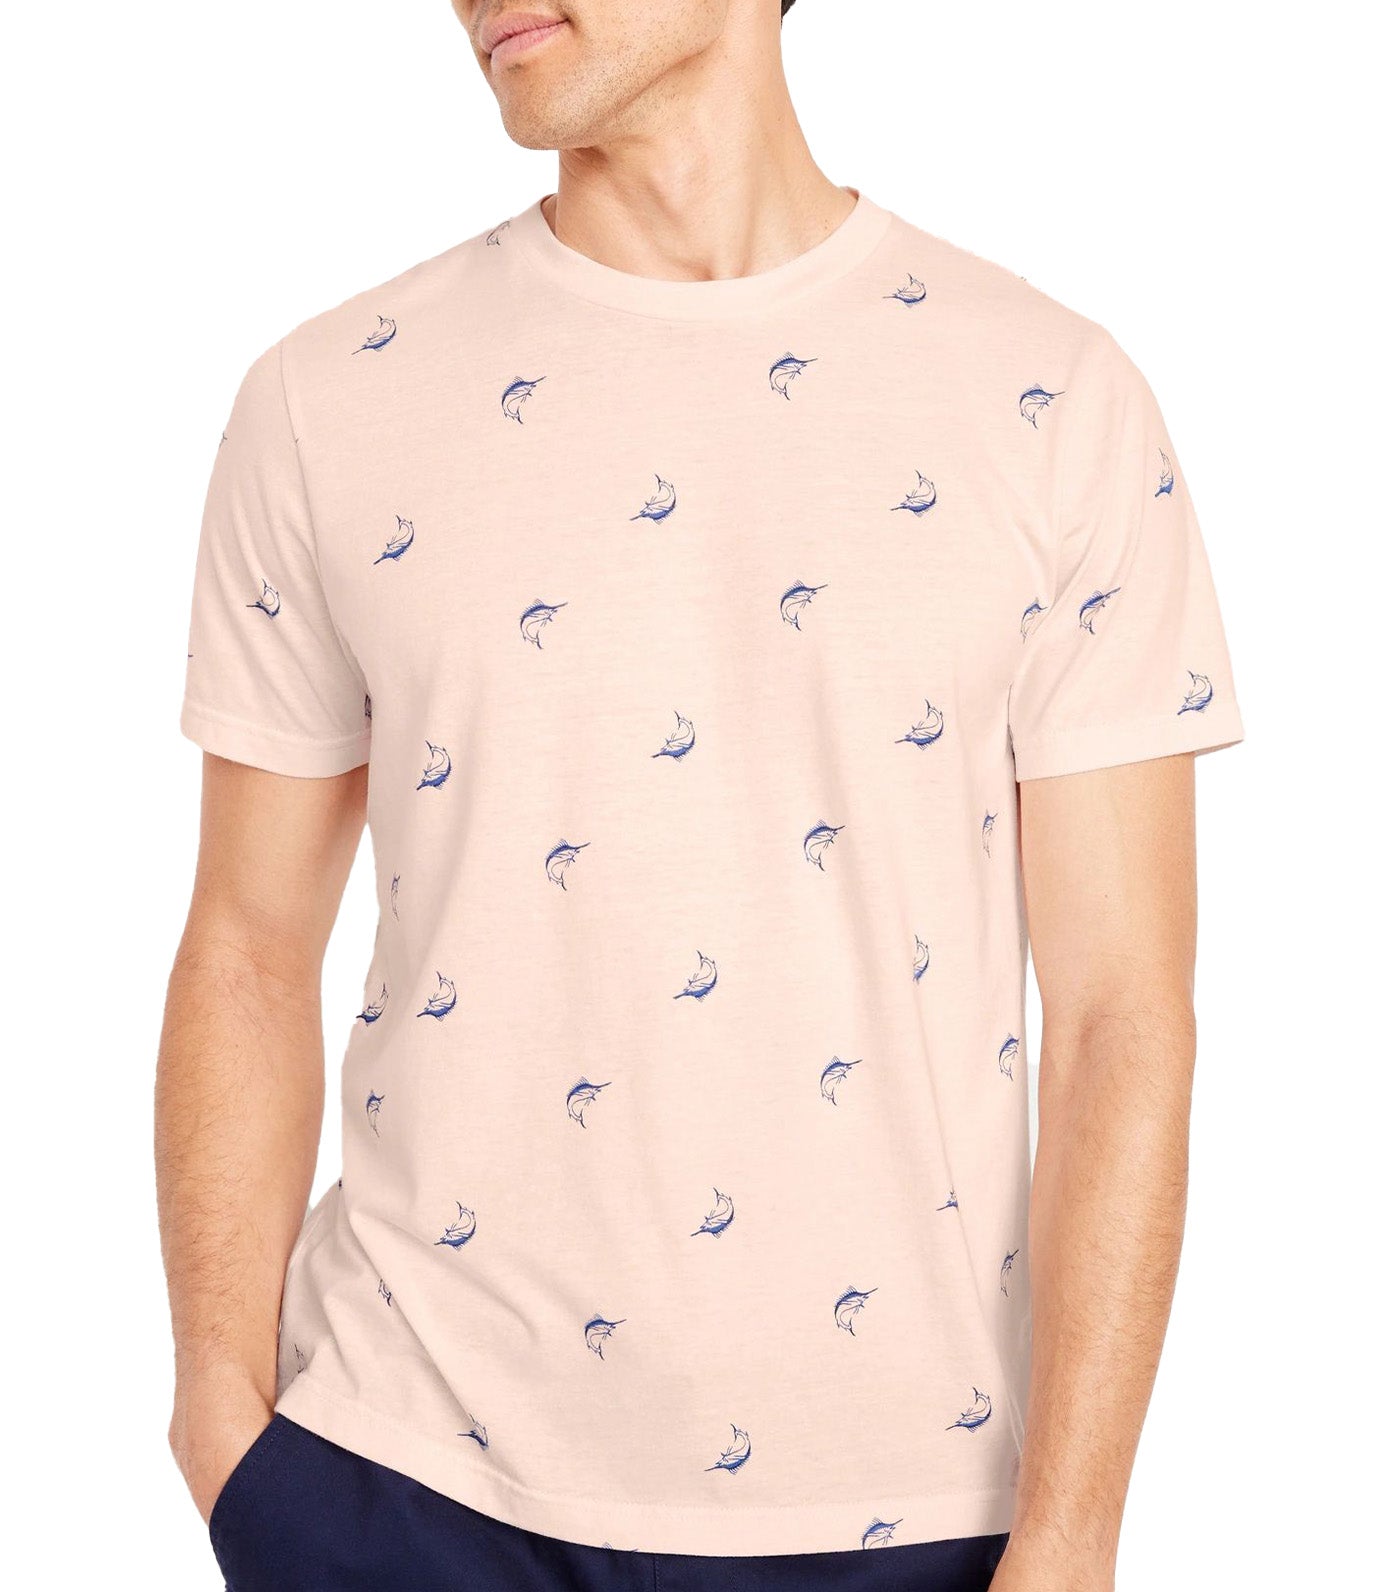 Crew-Neck T-Shirt for Men Pink Fish